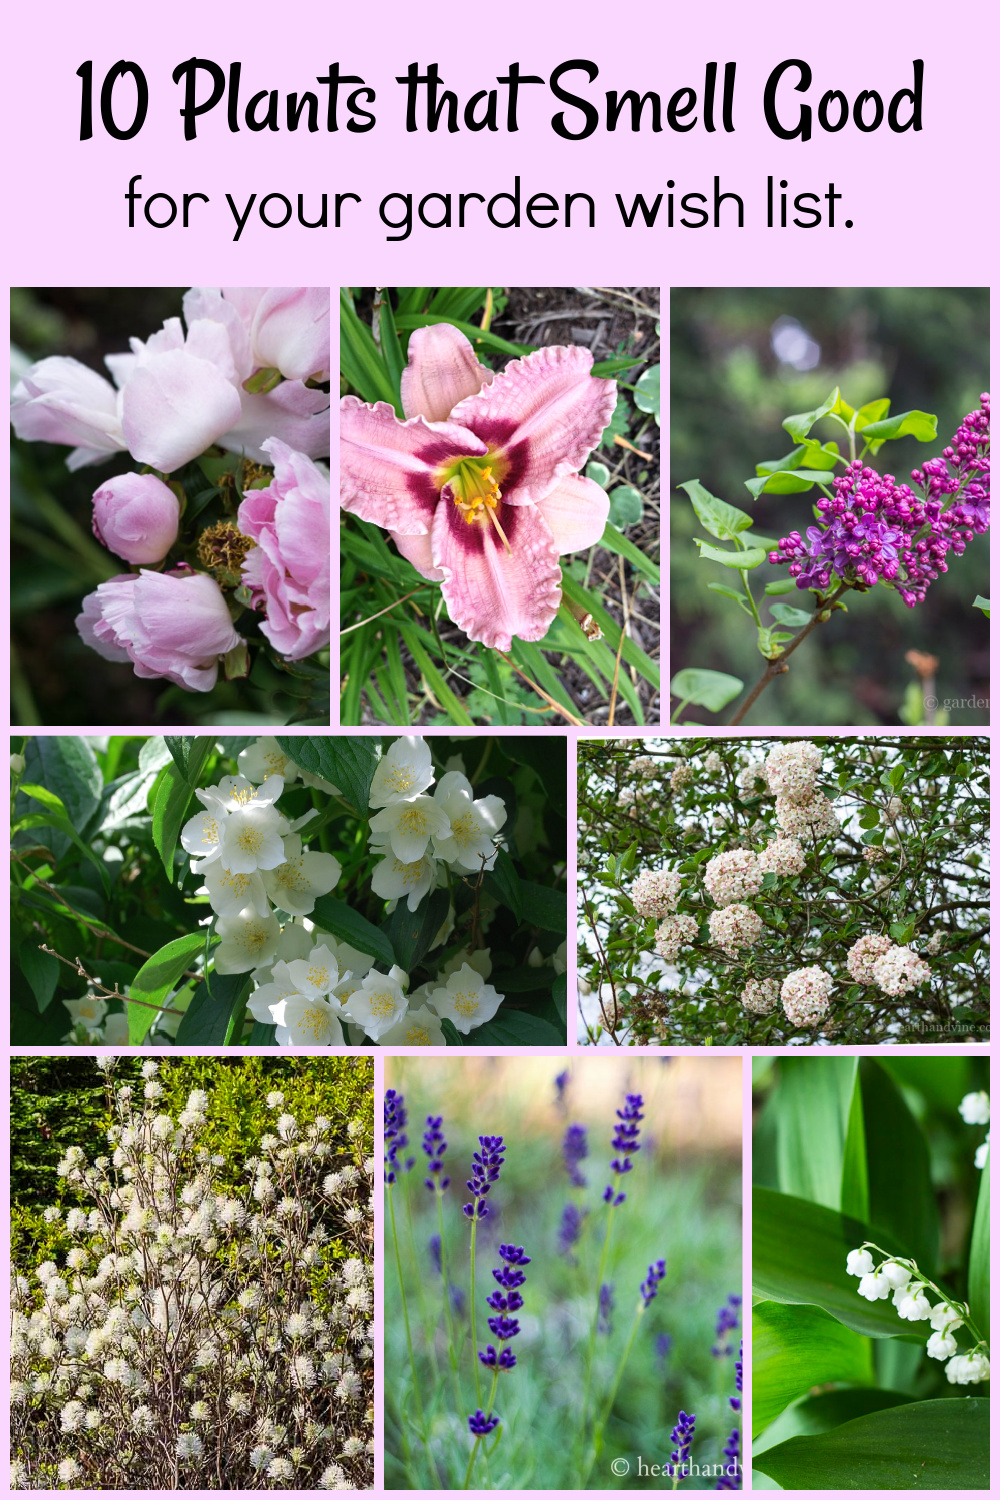 Collage of fragrant plants including peony, daylily, lilac, mock orange, viburnum, lavender and lily of the valley.